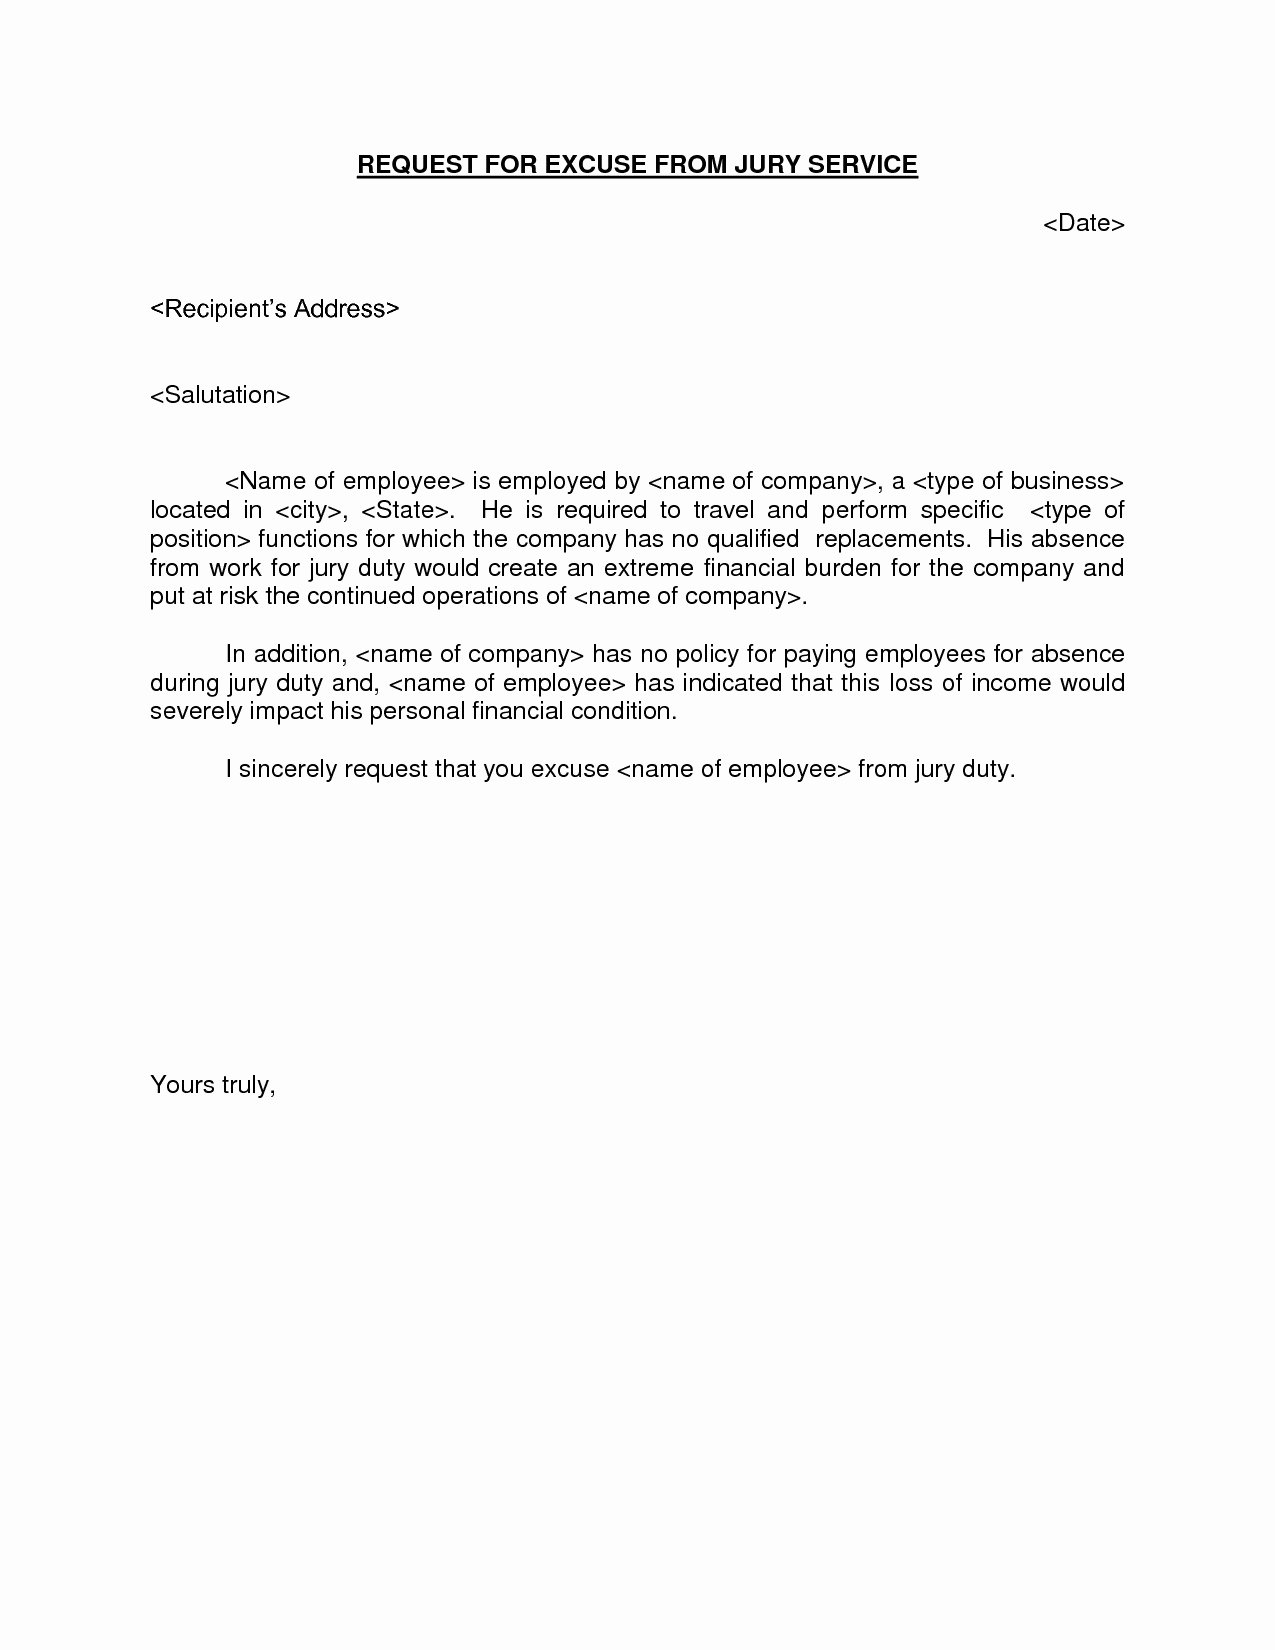 Jury Duty Letter Of Excuse From Employer Sample Unique Jury Duty Medical Excuse Letter Template Samples